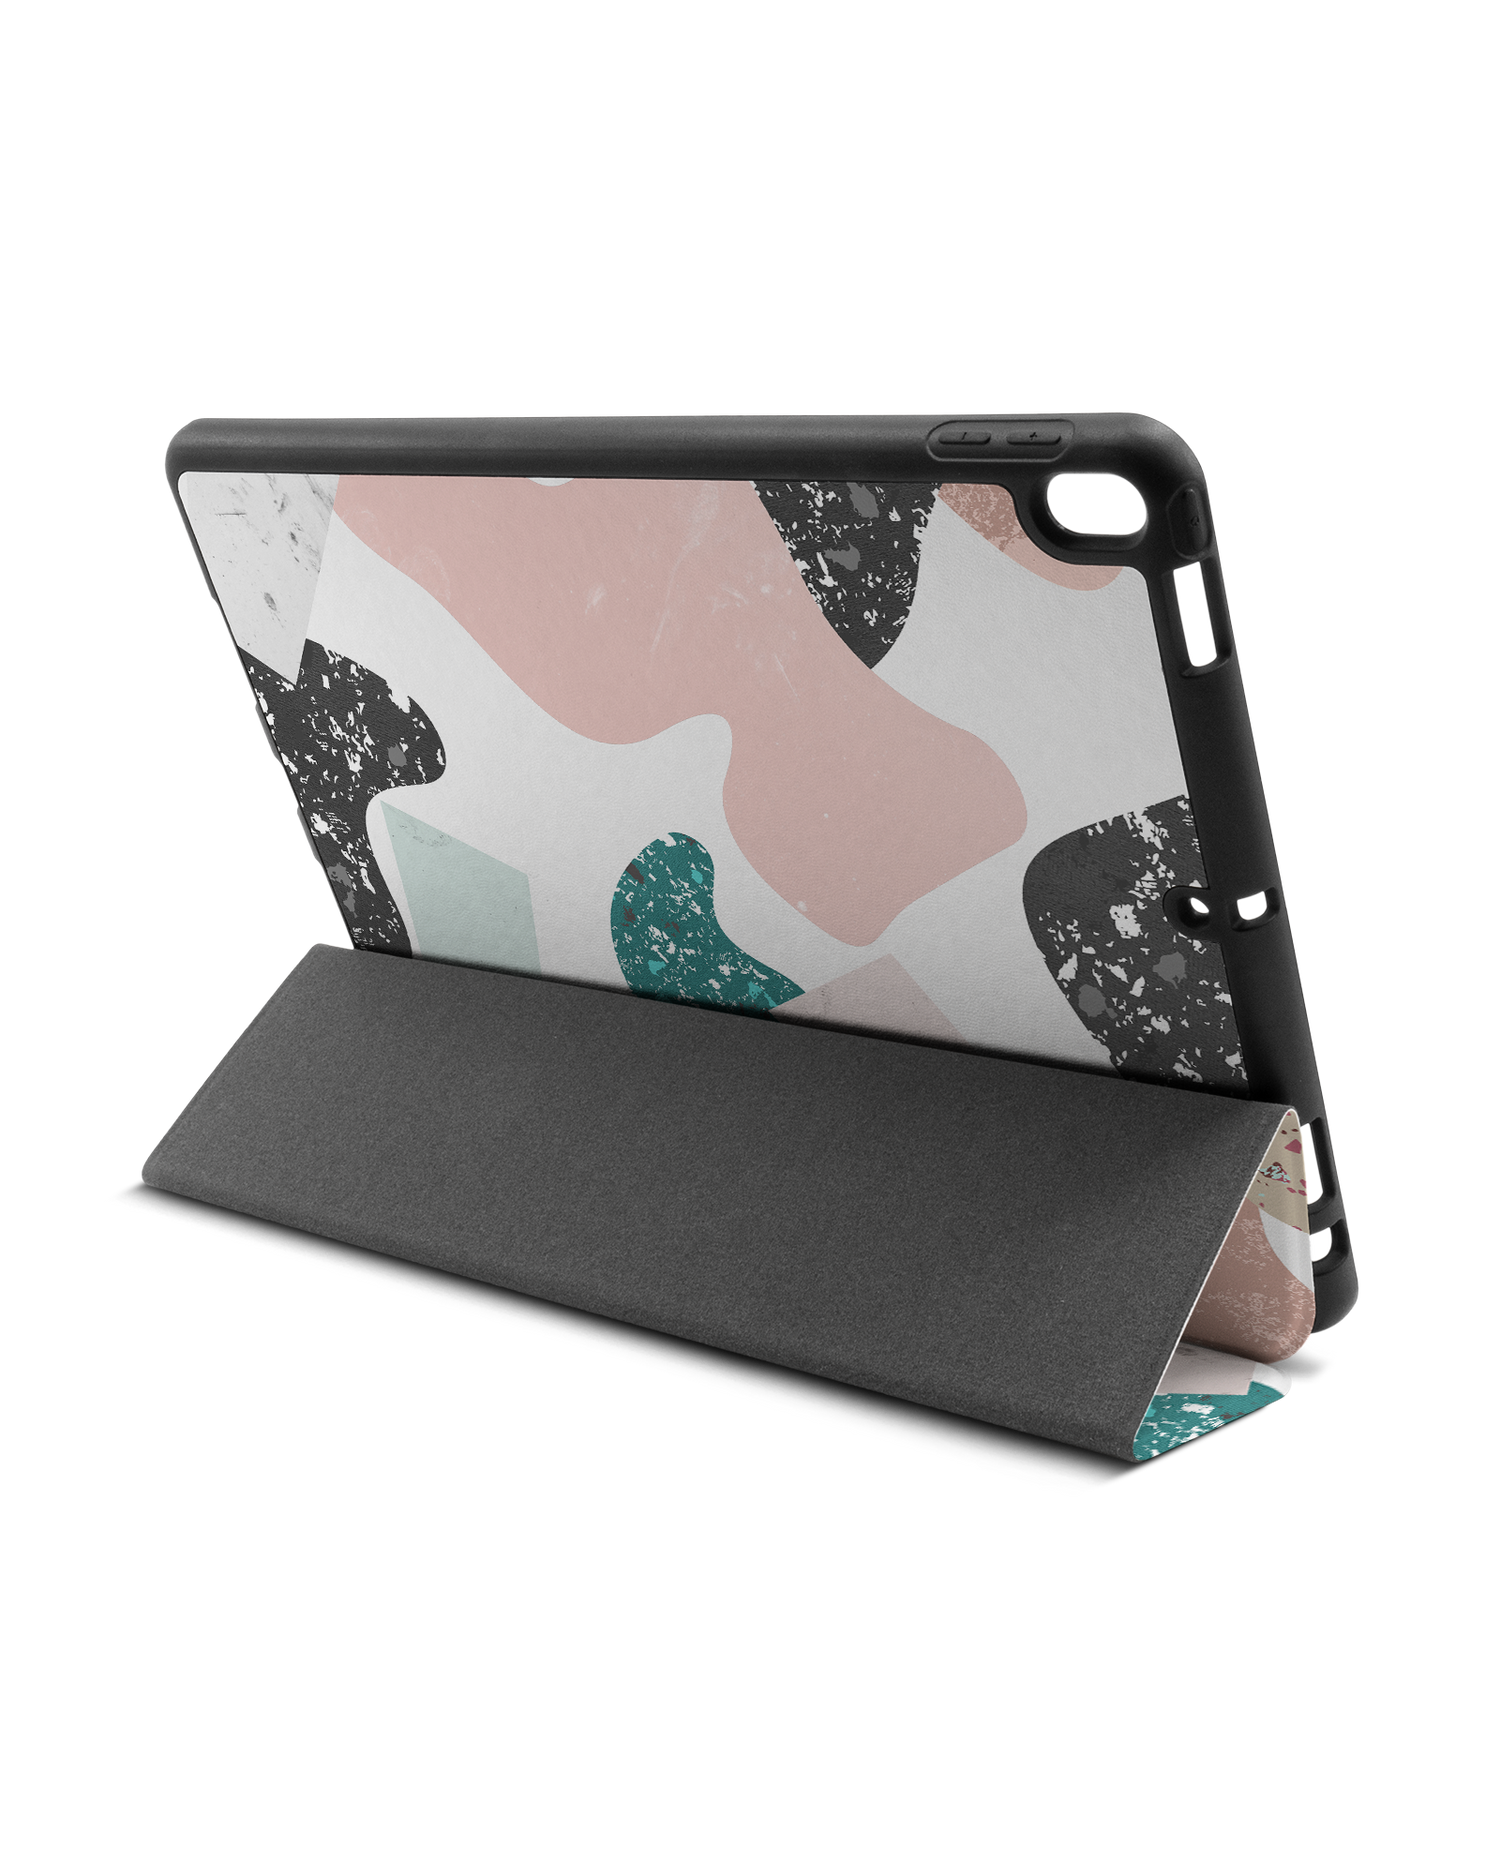 Scattered Shapes iPad Case with Pencil Holder Apple iPad Pro 10.5